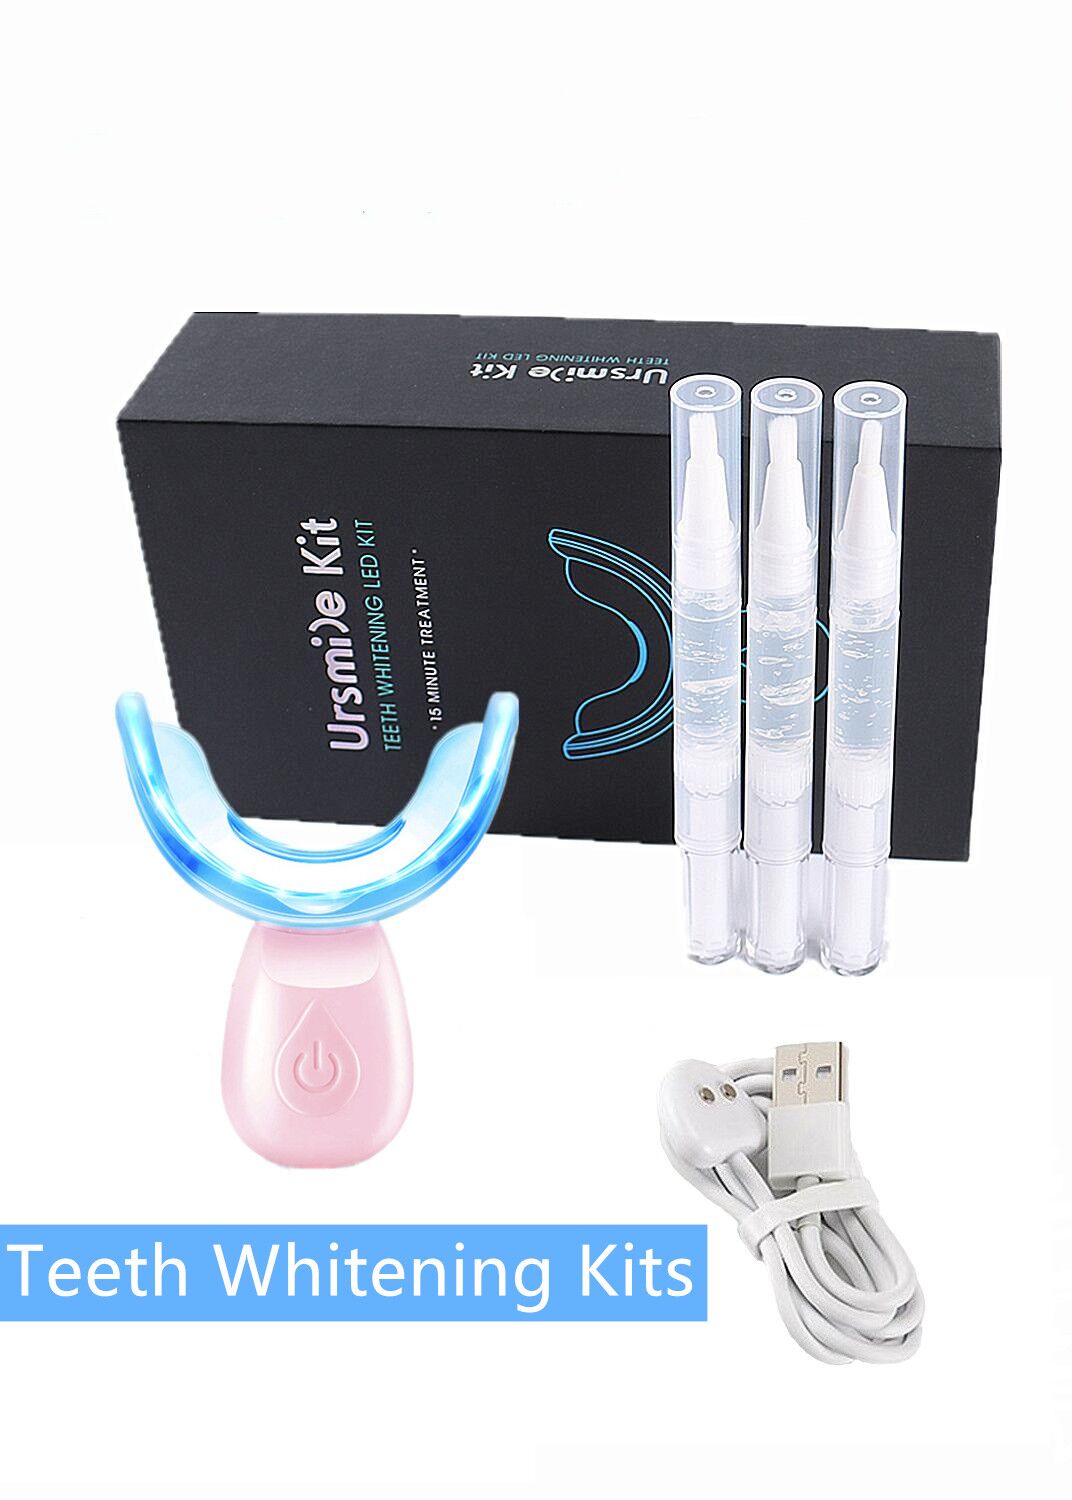 

Cold light Teeth Whitening LED Kit with 3*3ml tooth bleaching gel waterproof outstanding whitener effective use at home